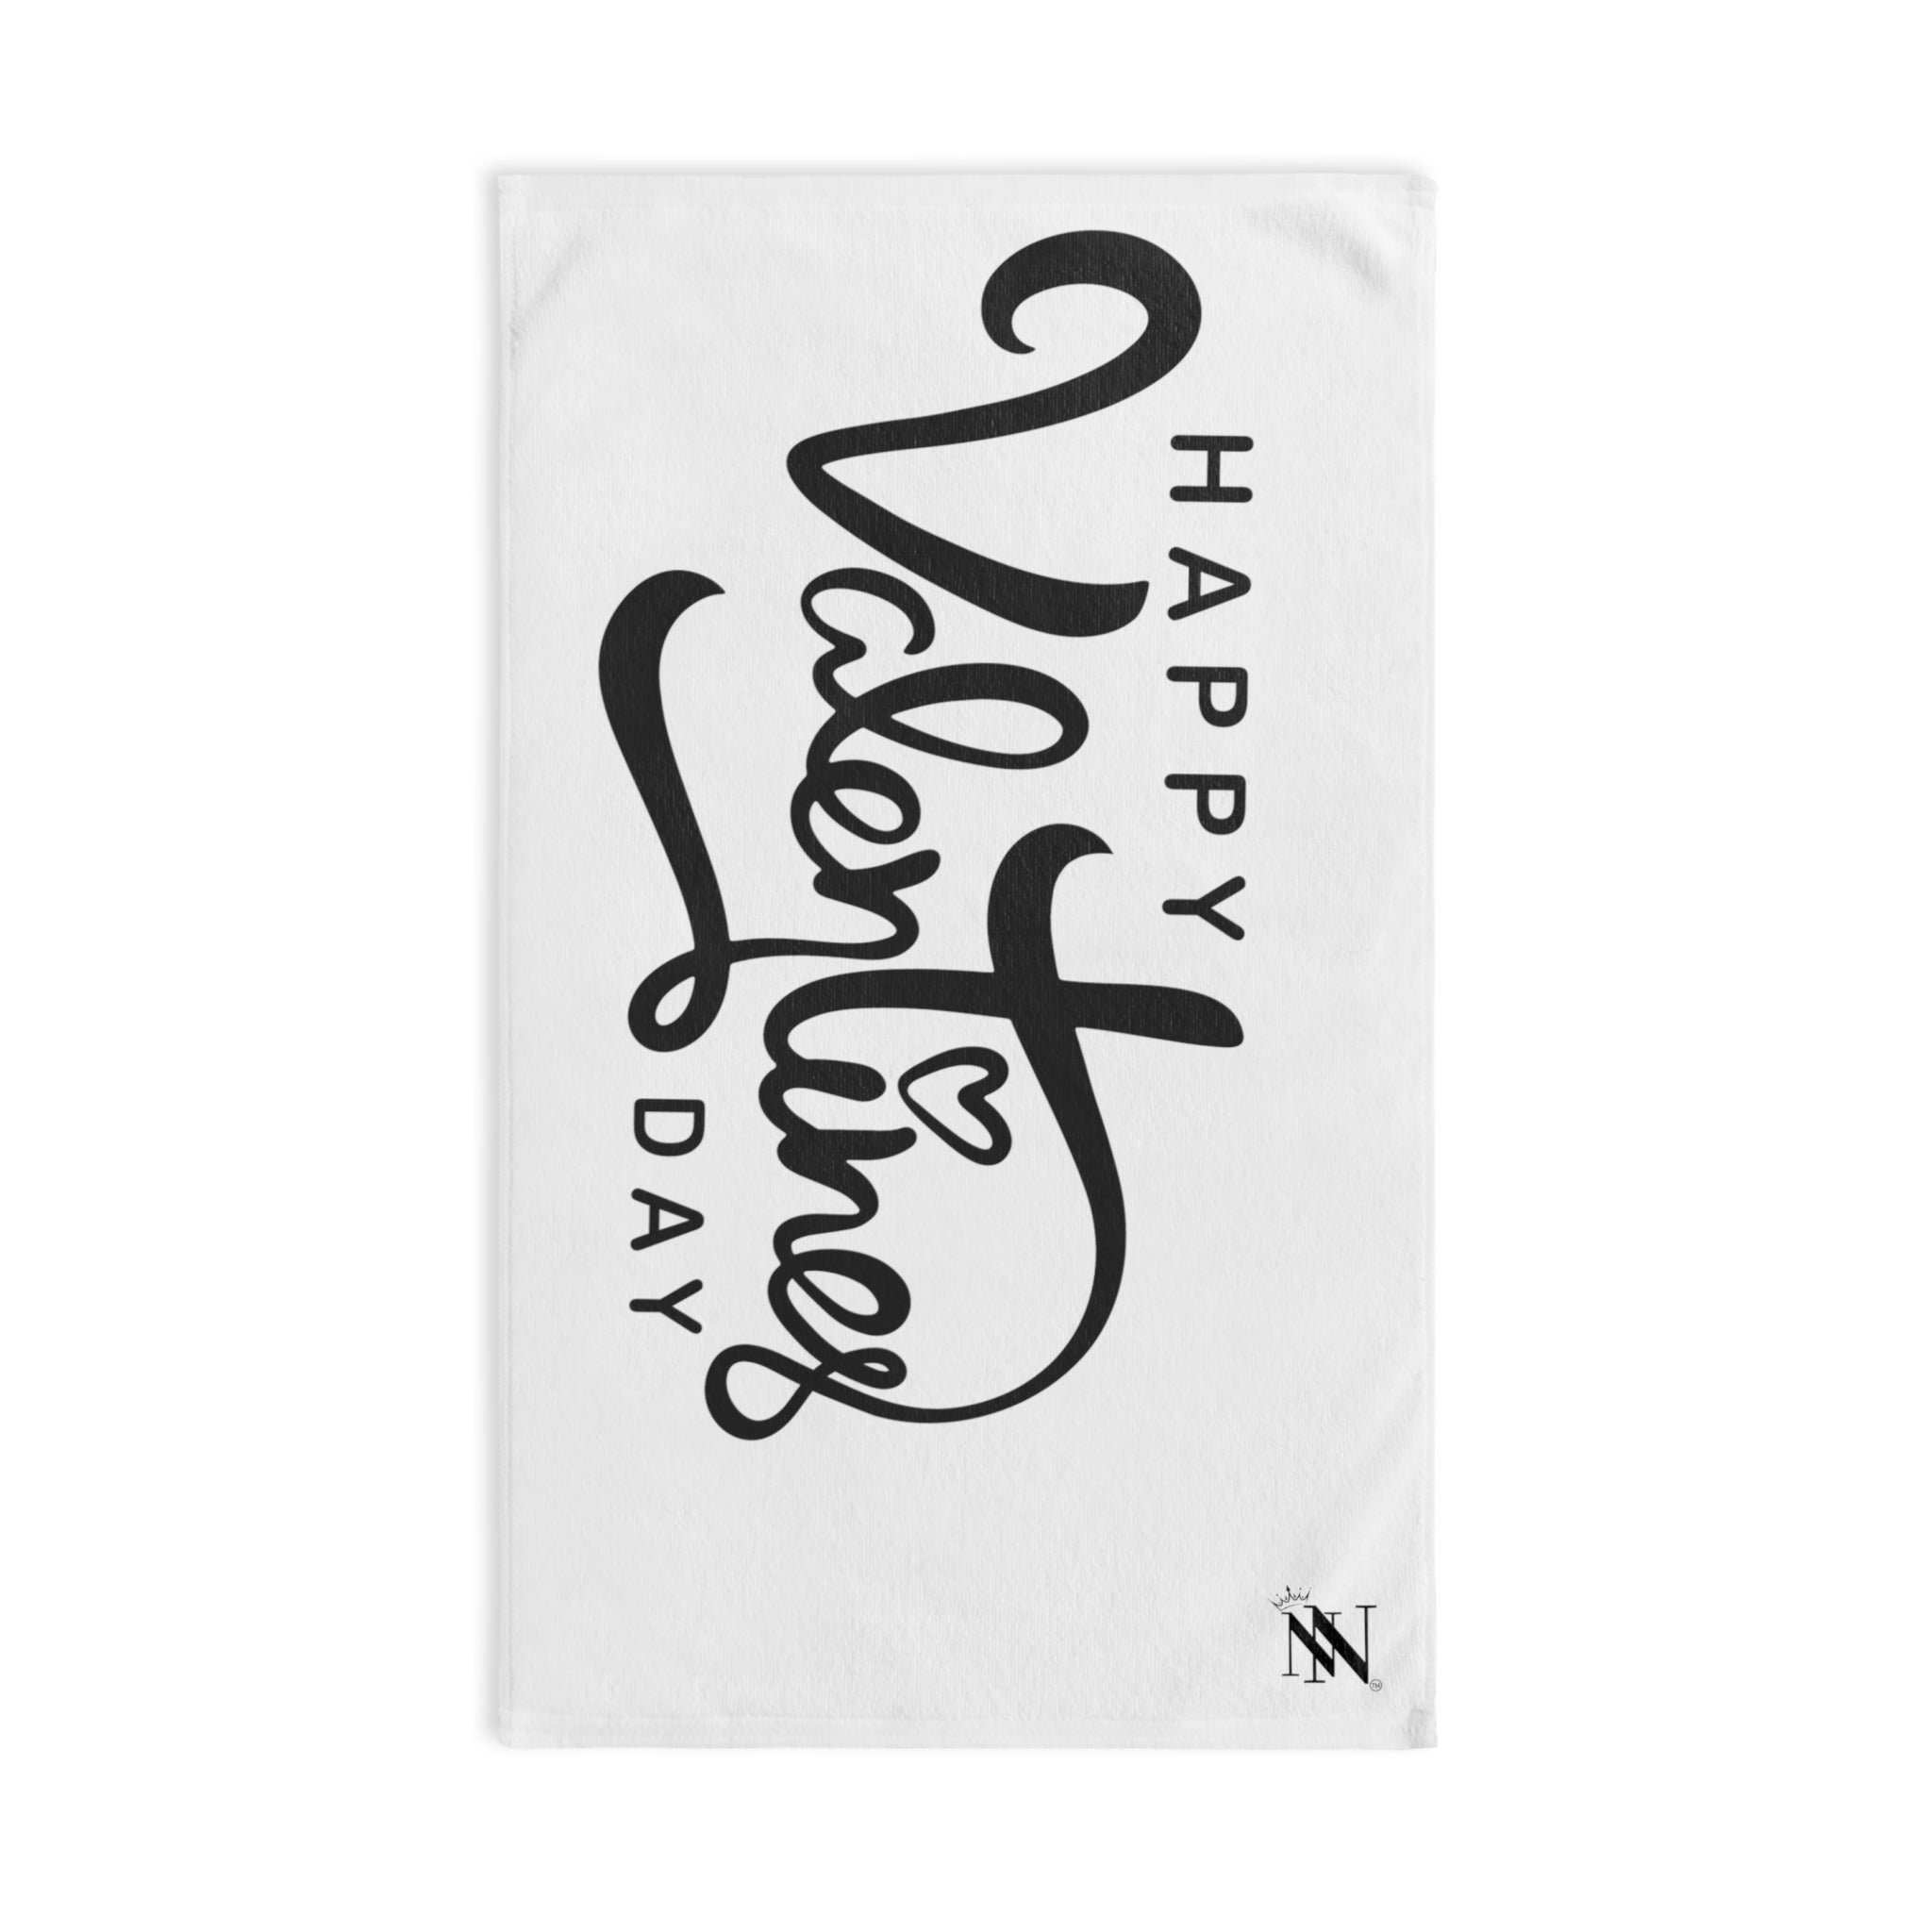 Happy Valentine White | Funny Gifts for Men - Gifts for Him - Birthday Gifts for Men, Him, Her, Husband, Boyfriend, Girlfriend, New Couple Gifts, Fathers & Valentines Day Gifts, Christmas Gifts NECTAR NAPKINS